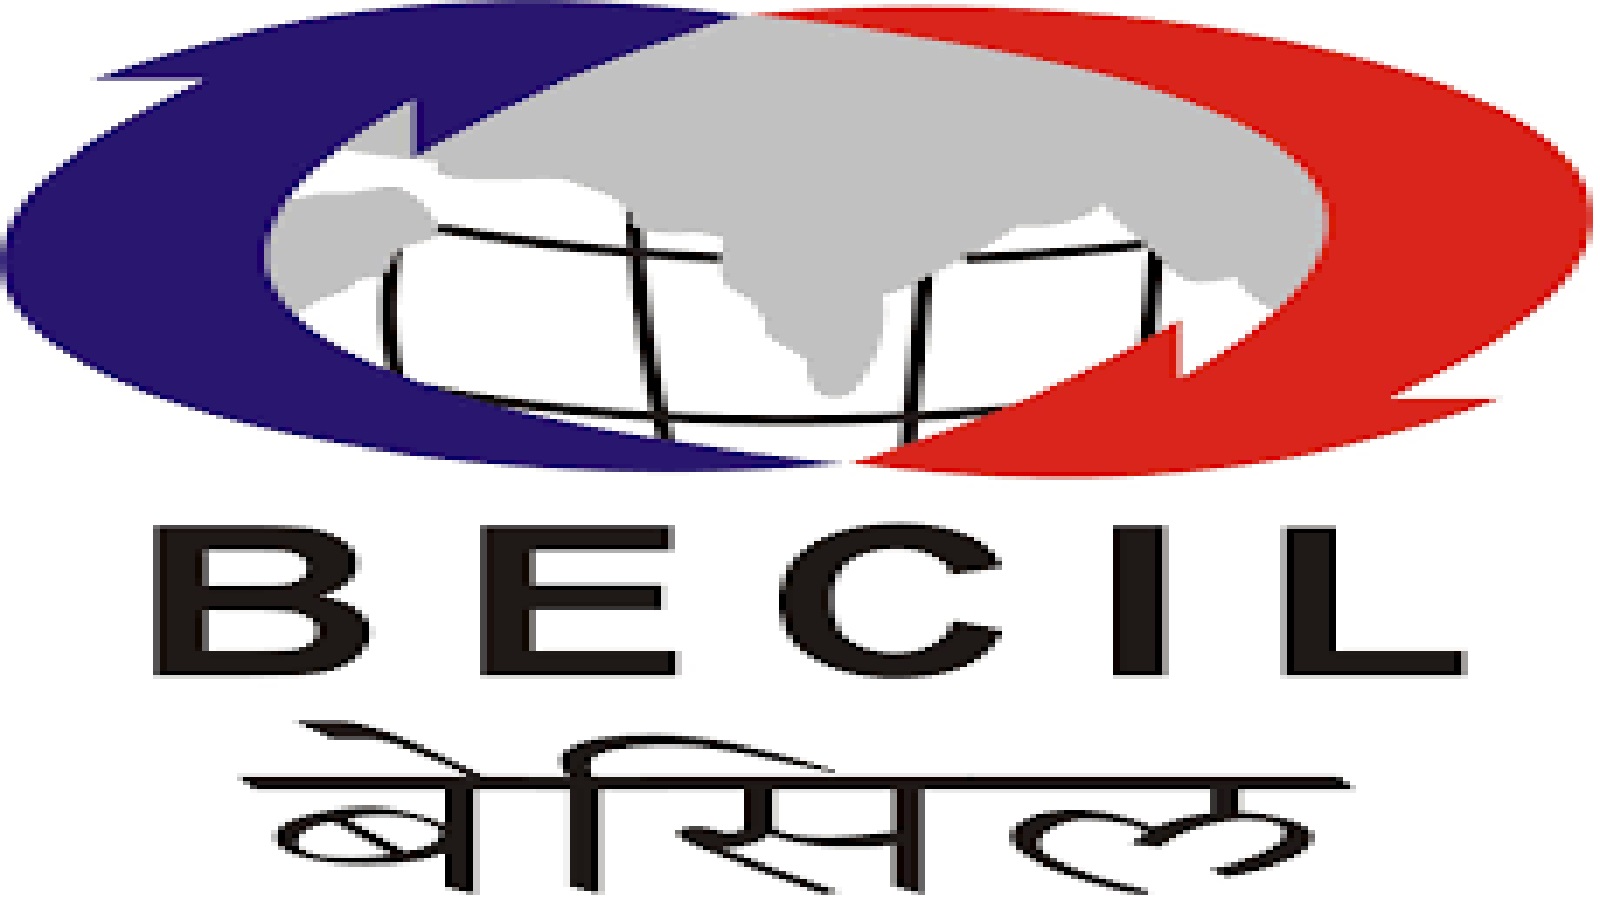 Broadcast Engineering Consultants India Limited (BECIL)